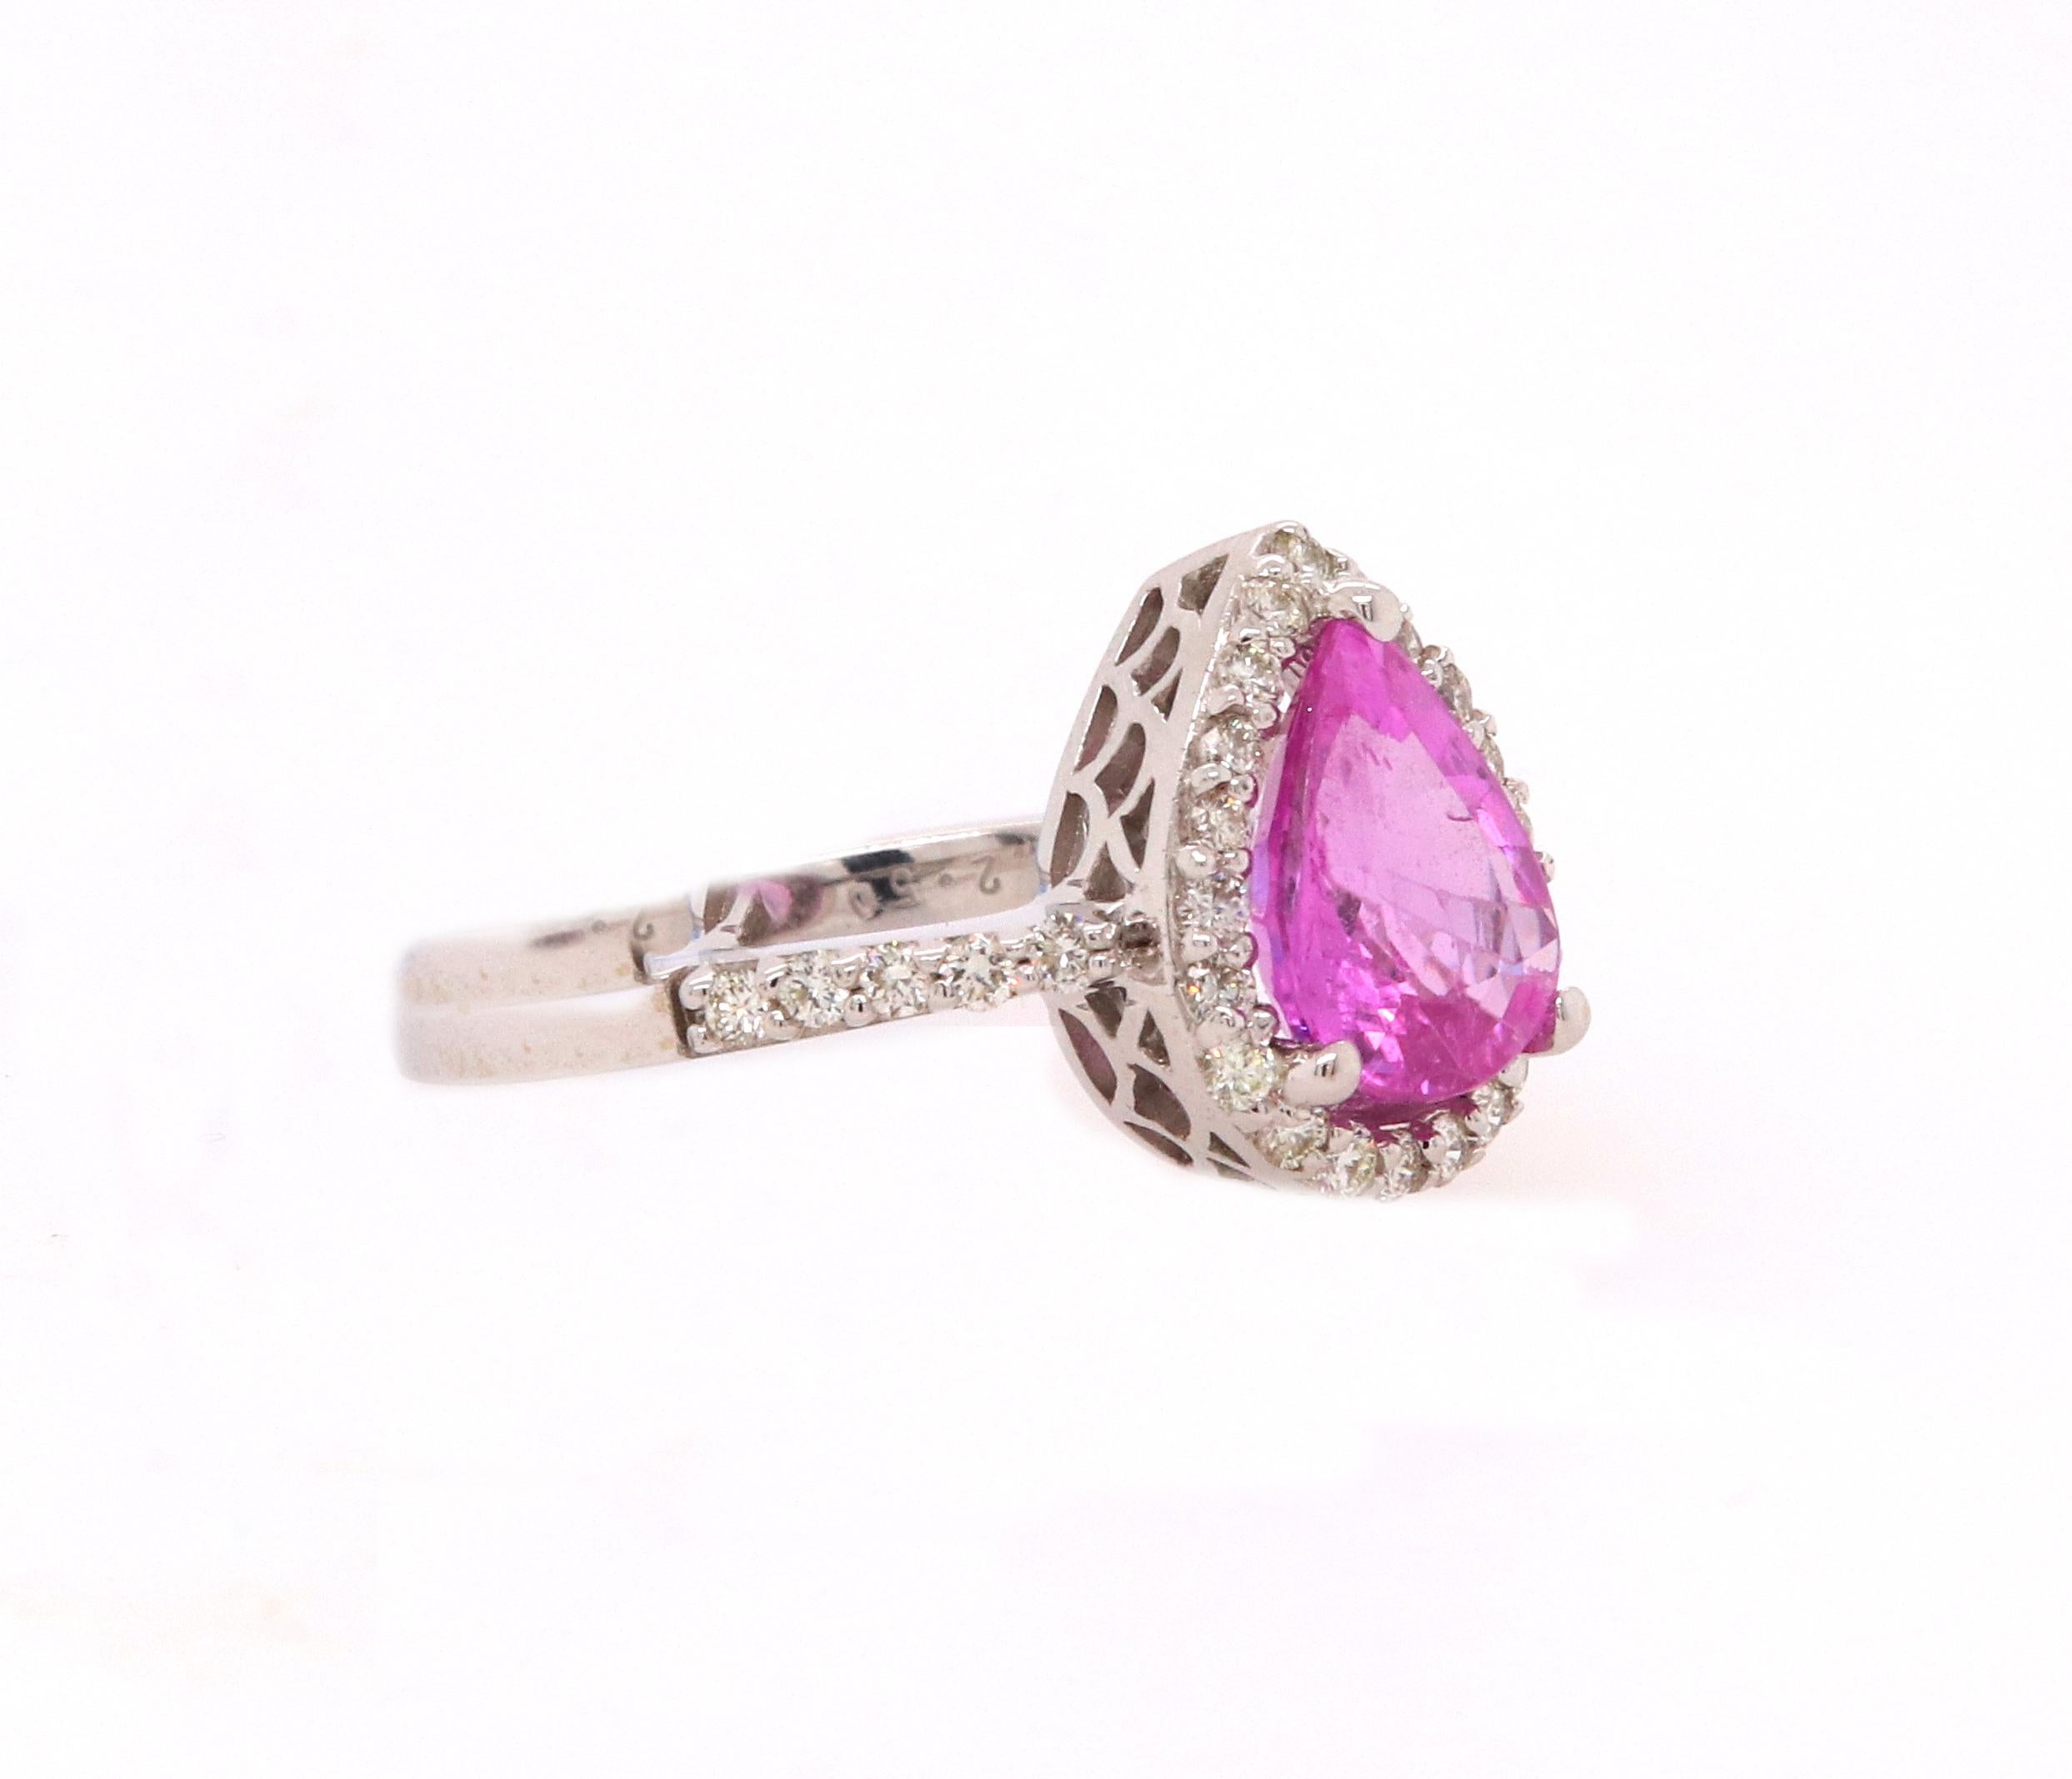 Material: 14k White Gold 
Center Stone Details: 1 Pear Shaped Pink Sapphire at 2.5 Carats
Mounting Diamond Details: 31 Brilliant Round White Diamonds at 0.42 Carats - Clarity: VS-SI / Color: H-I
Complimentary sizing on all Alberto rings

Fine